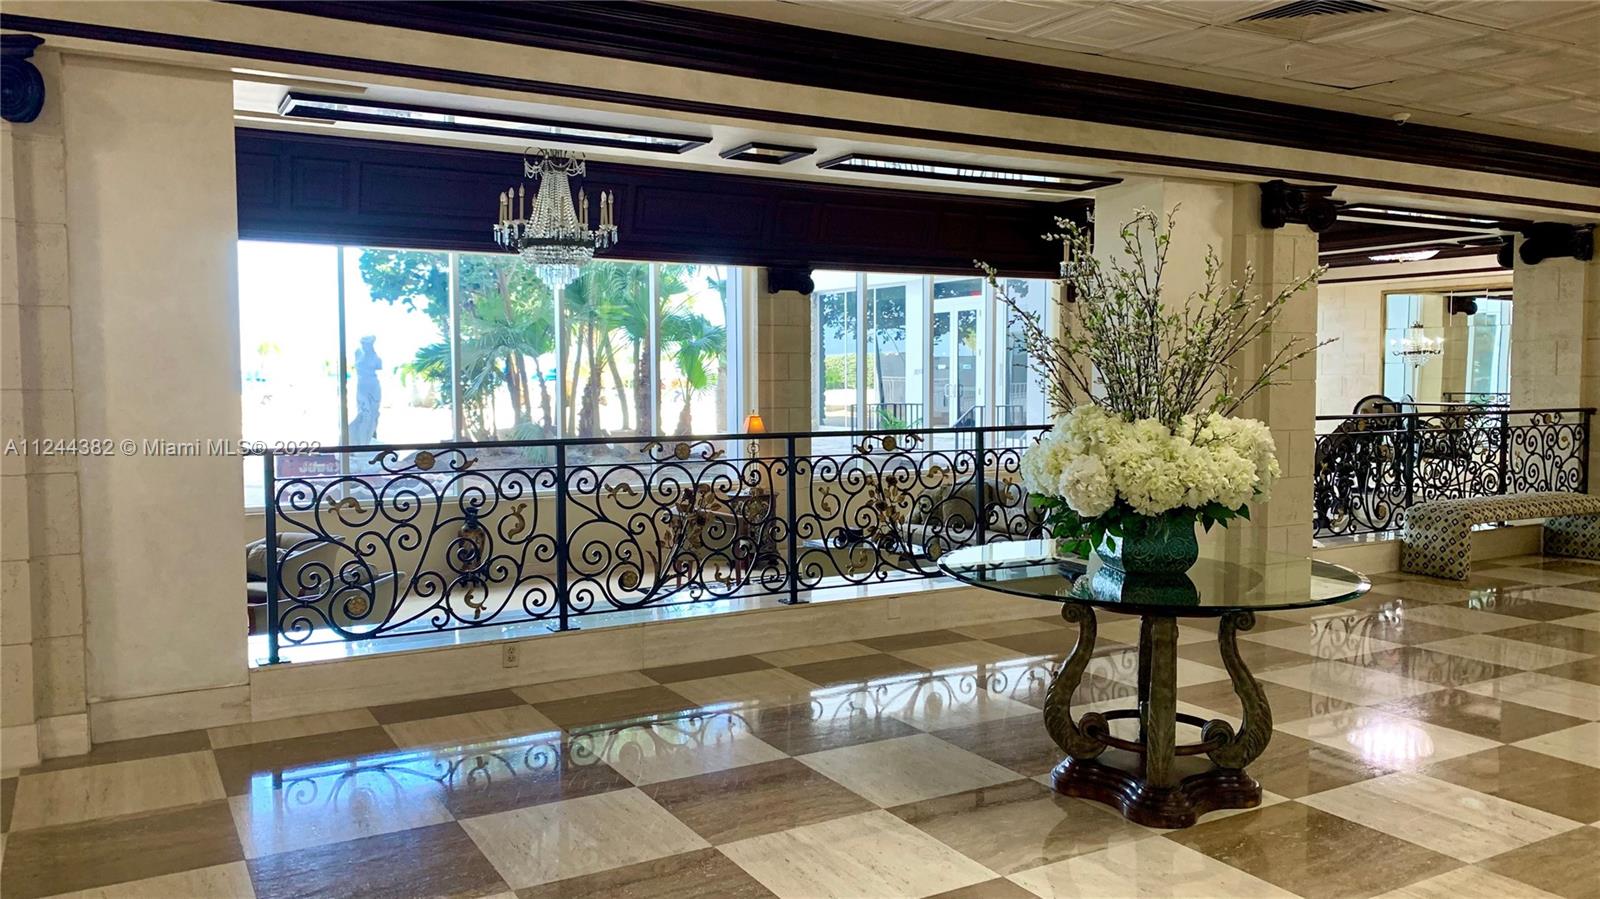 MAIN ENTRANCE LOBBY WITH DIRECT OCEAN AND GARDEN VIEWS